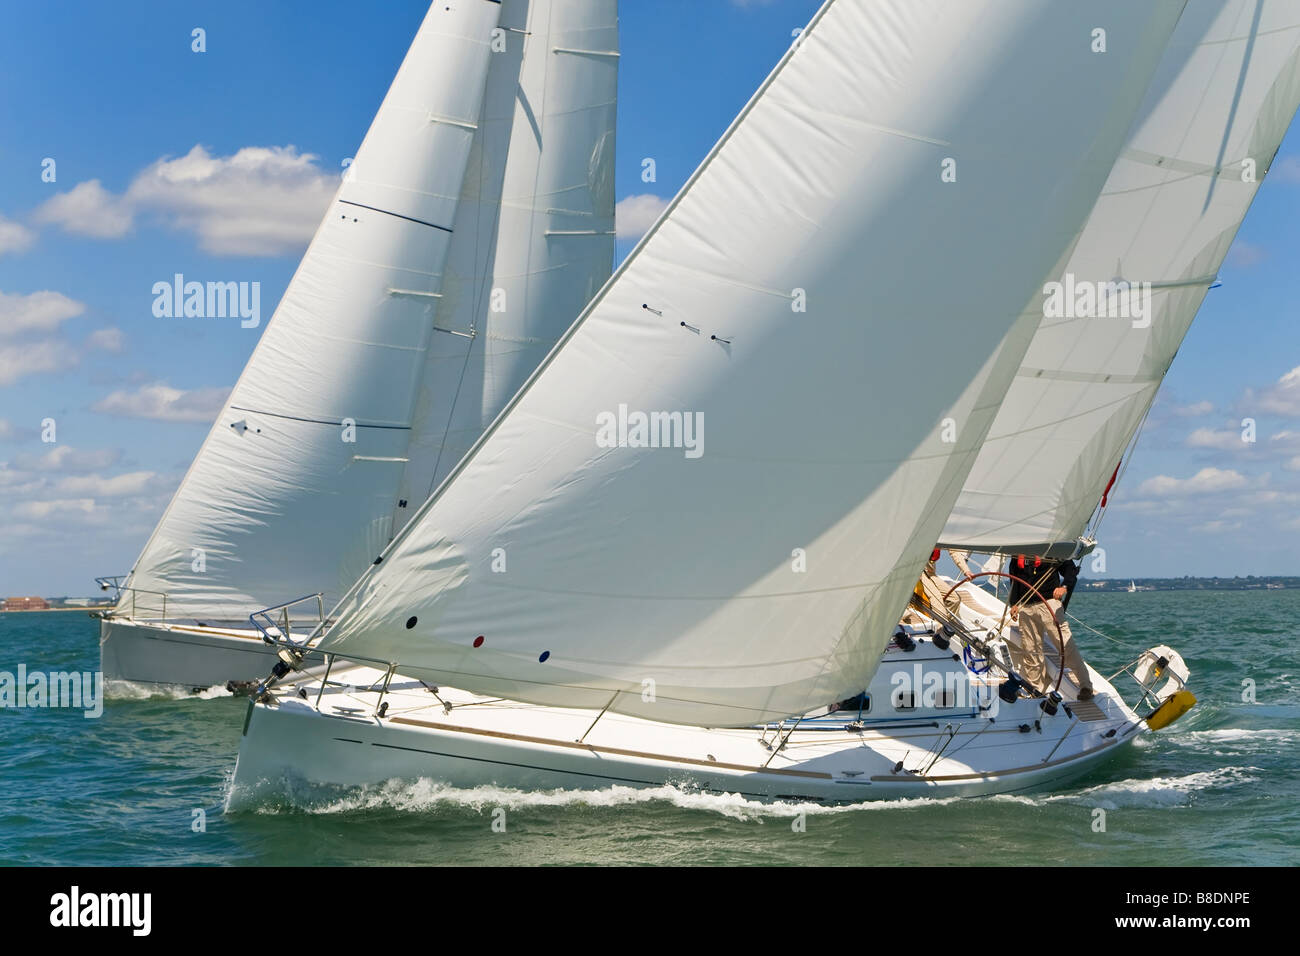 Two beautiful white yachts racing close to each other on a bright sunny day Stock Photo